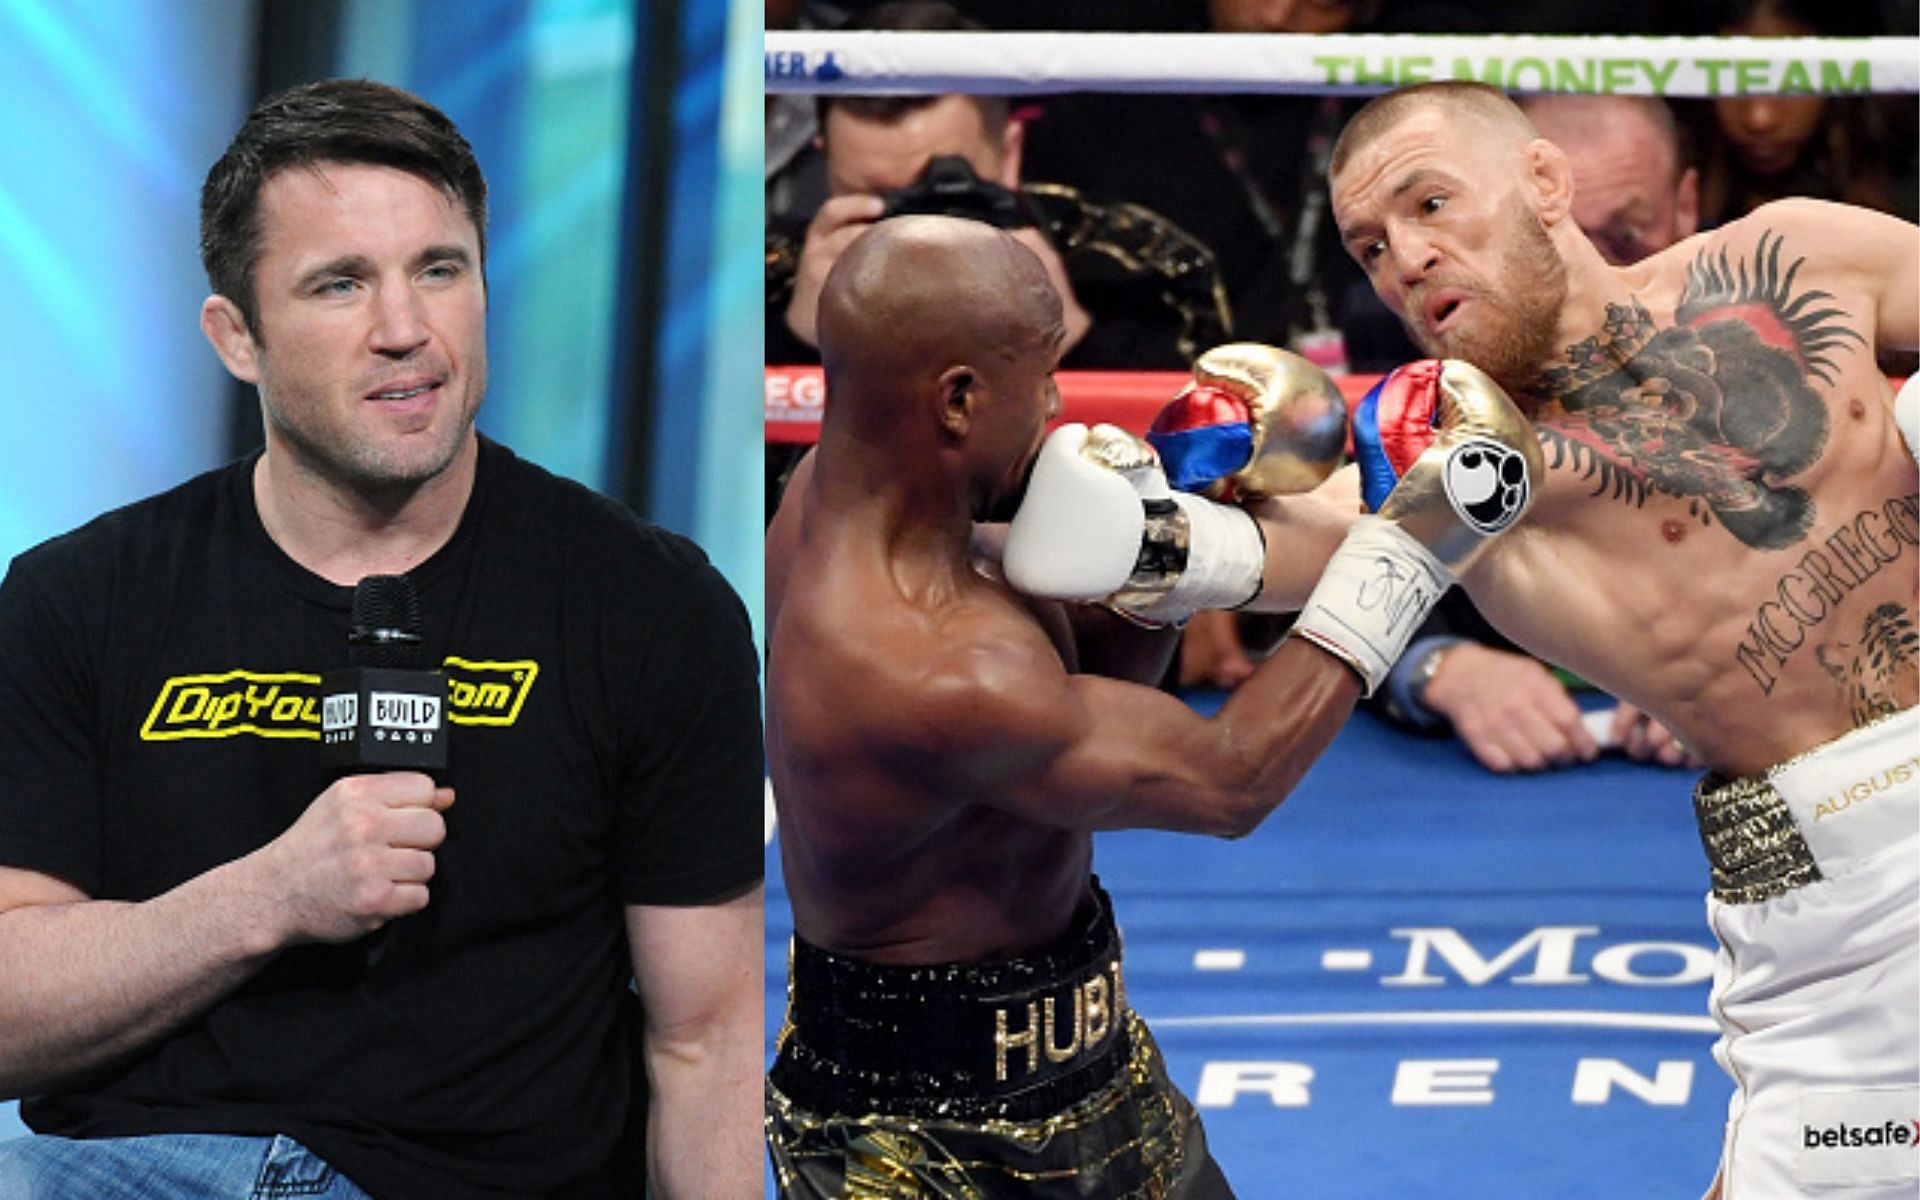 Chael Sonnen (L) and Conor McGregor punching Floyd Mayweather (R)